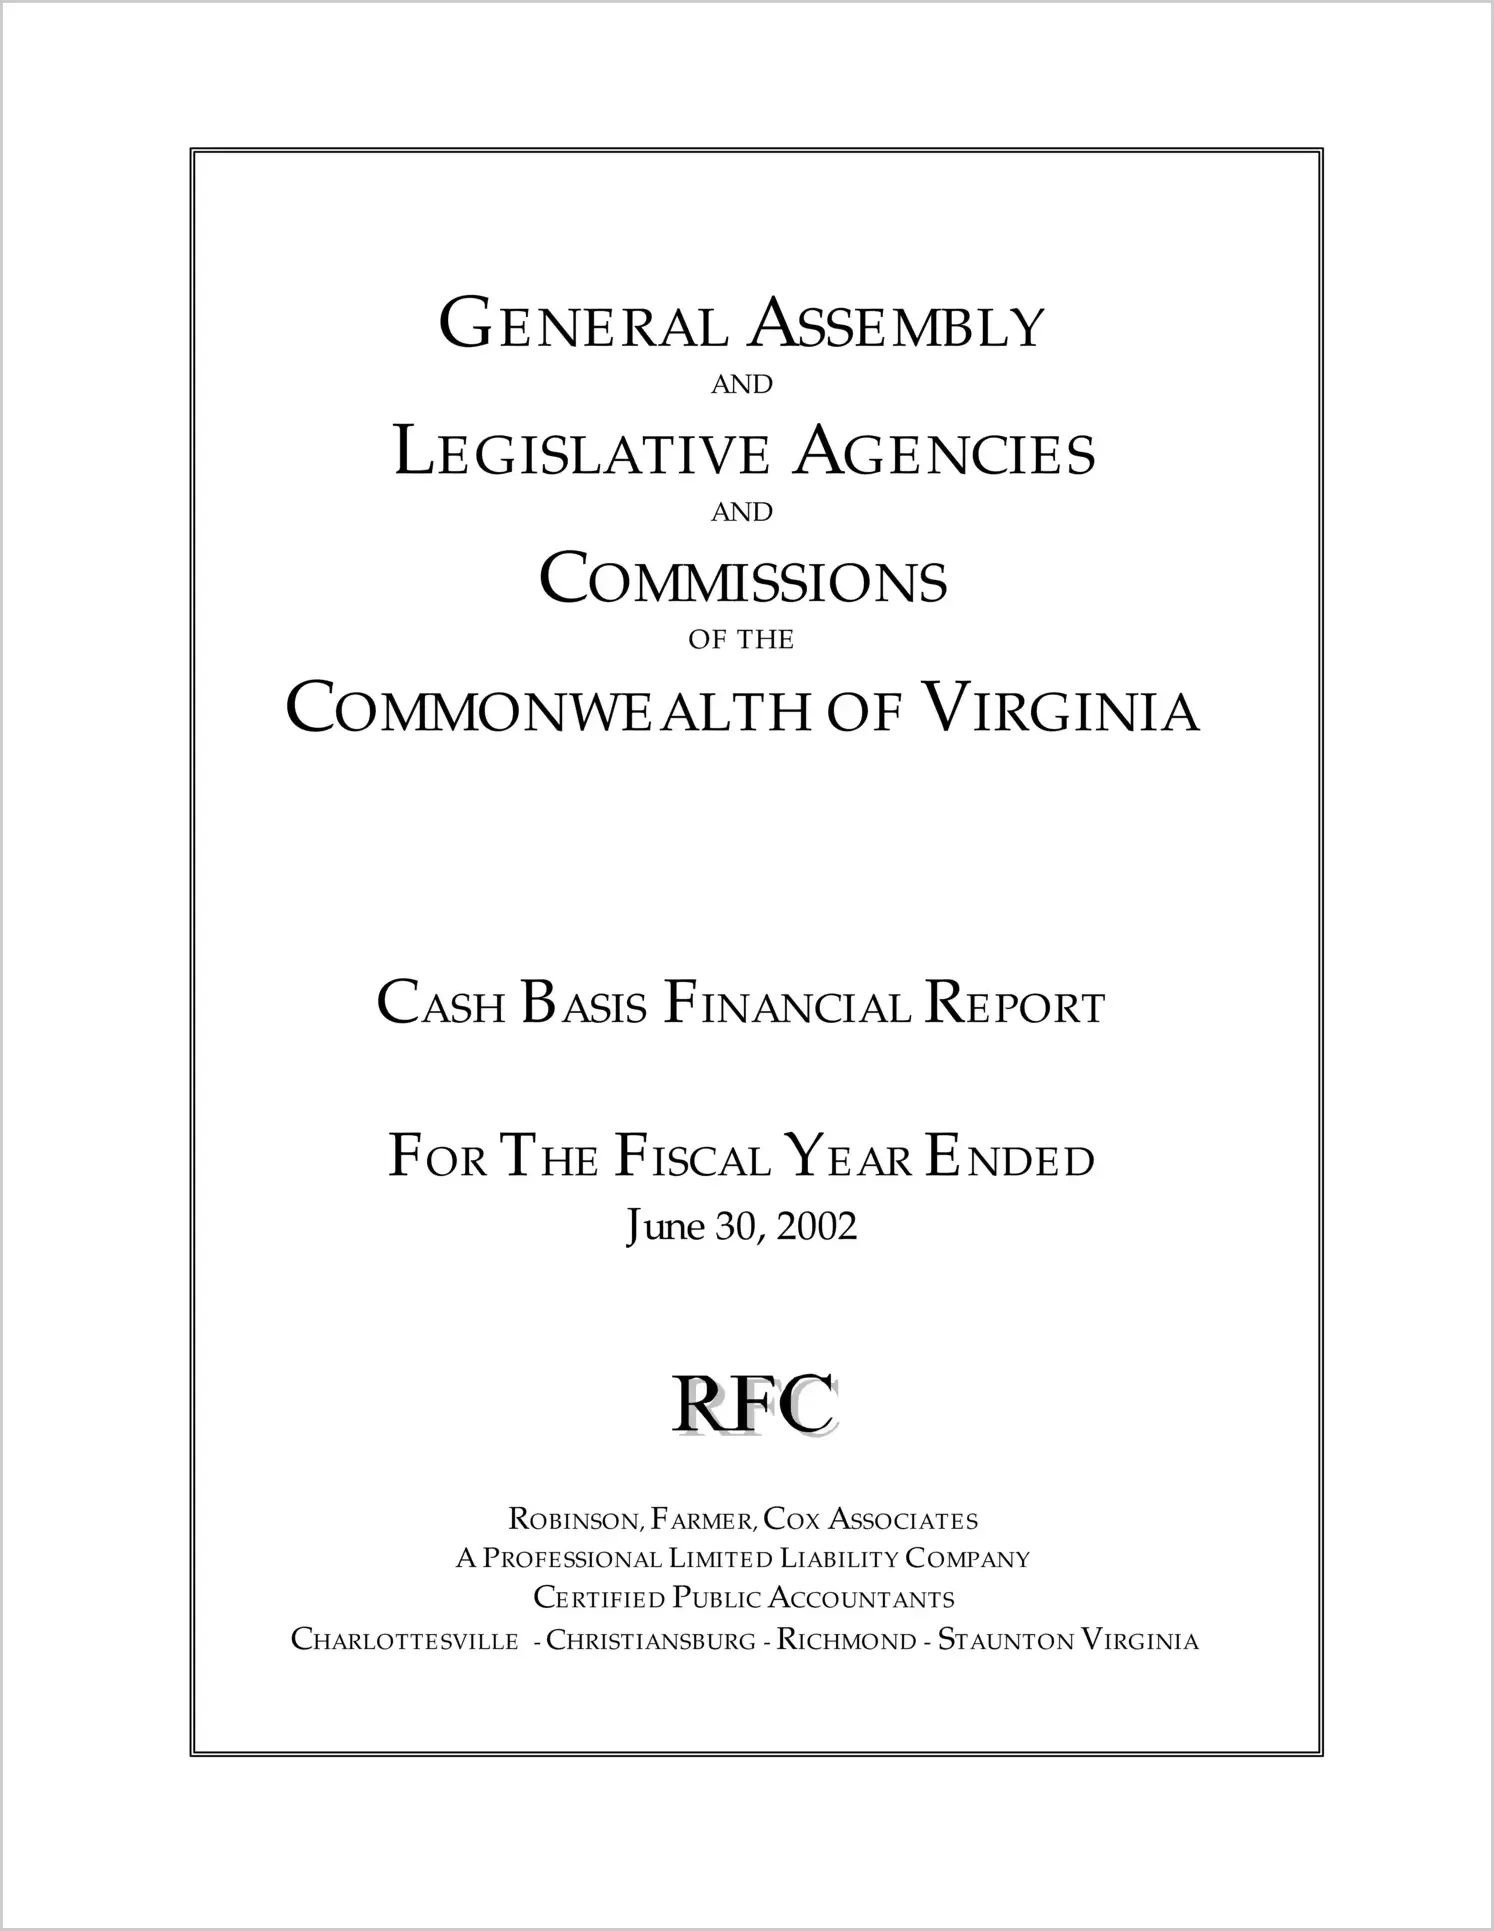 General Assembly and Legislative Agencies and Commissions of the Commonwealth of Virginia Cash Basis Financial Report For The Fiscal Year ended June 30, 2002